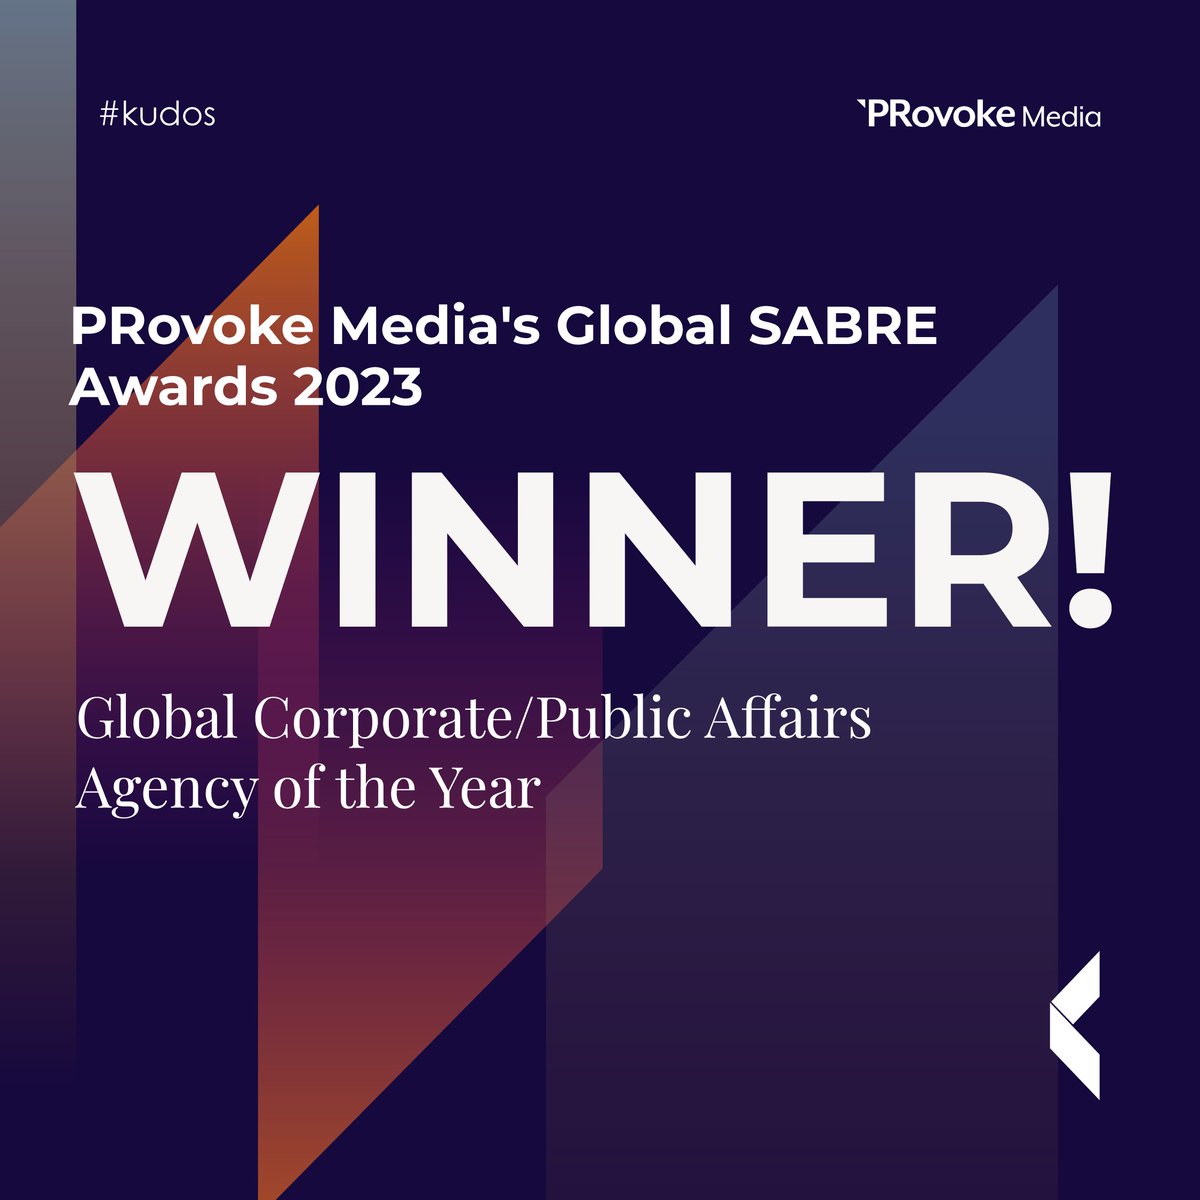 Absolutely fantastic news for @SECNewgateGroup who were awarded Global Corporate/Public Affairs Agency of the Year at the PRovoke Media Global #SABREawards last night in Washington D.C. A truly amazing achievement by our teams and colleagues across the world! #award